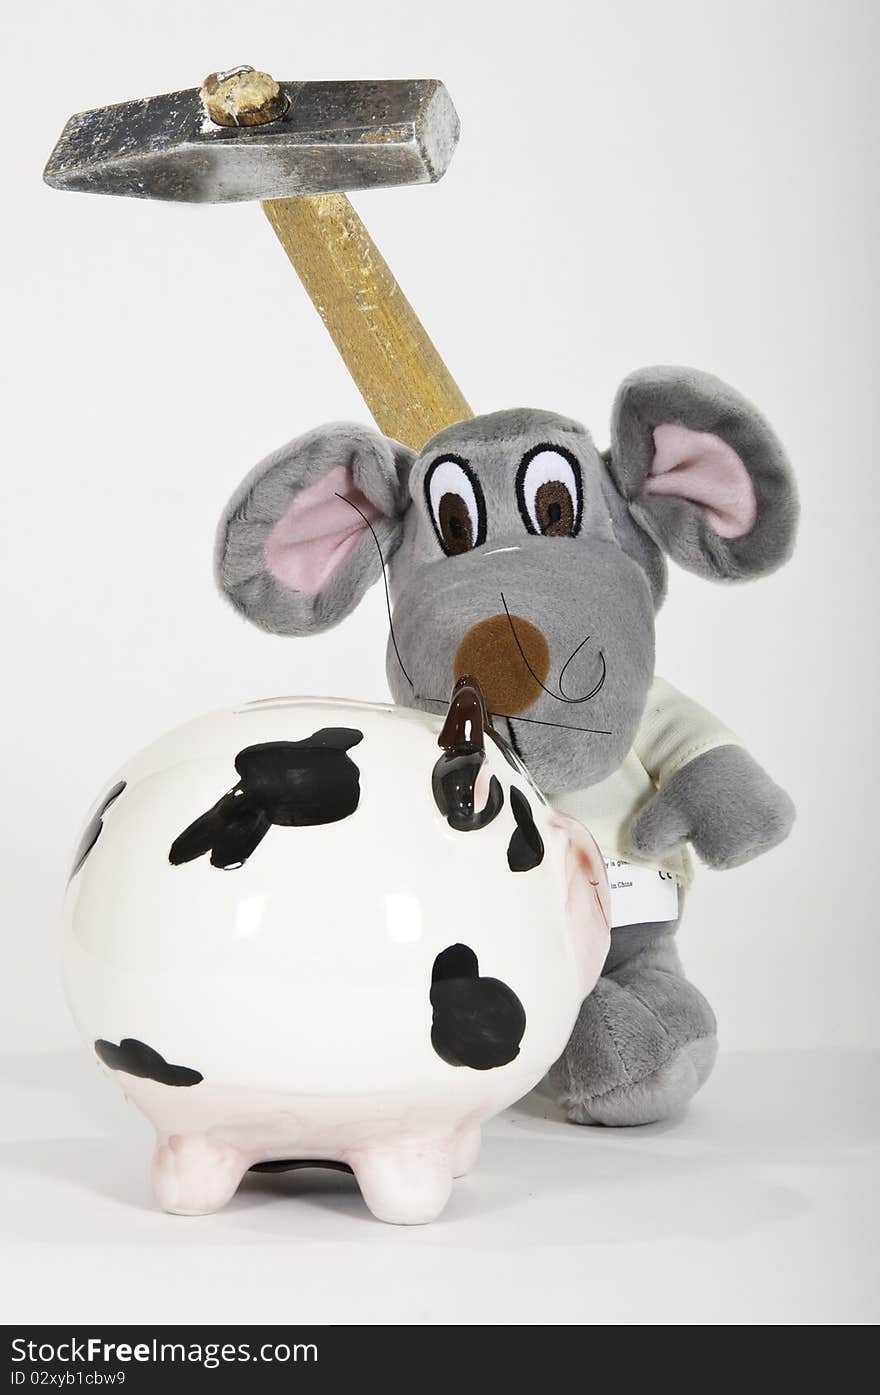 This image shows a soft toy with a hammer to break a piggy bank. This image shows a soft toy with a hammer to break a piggy bank